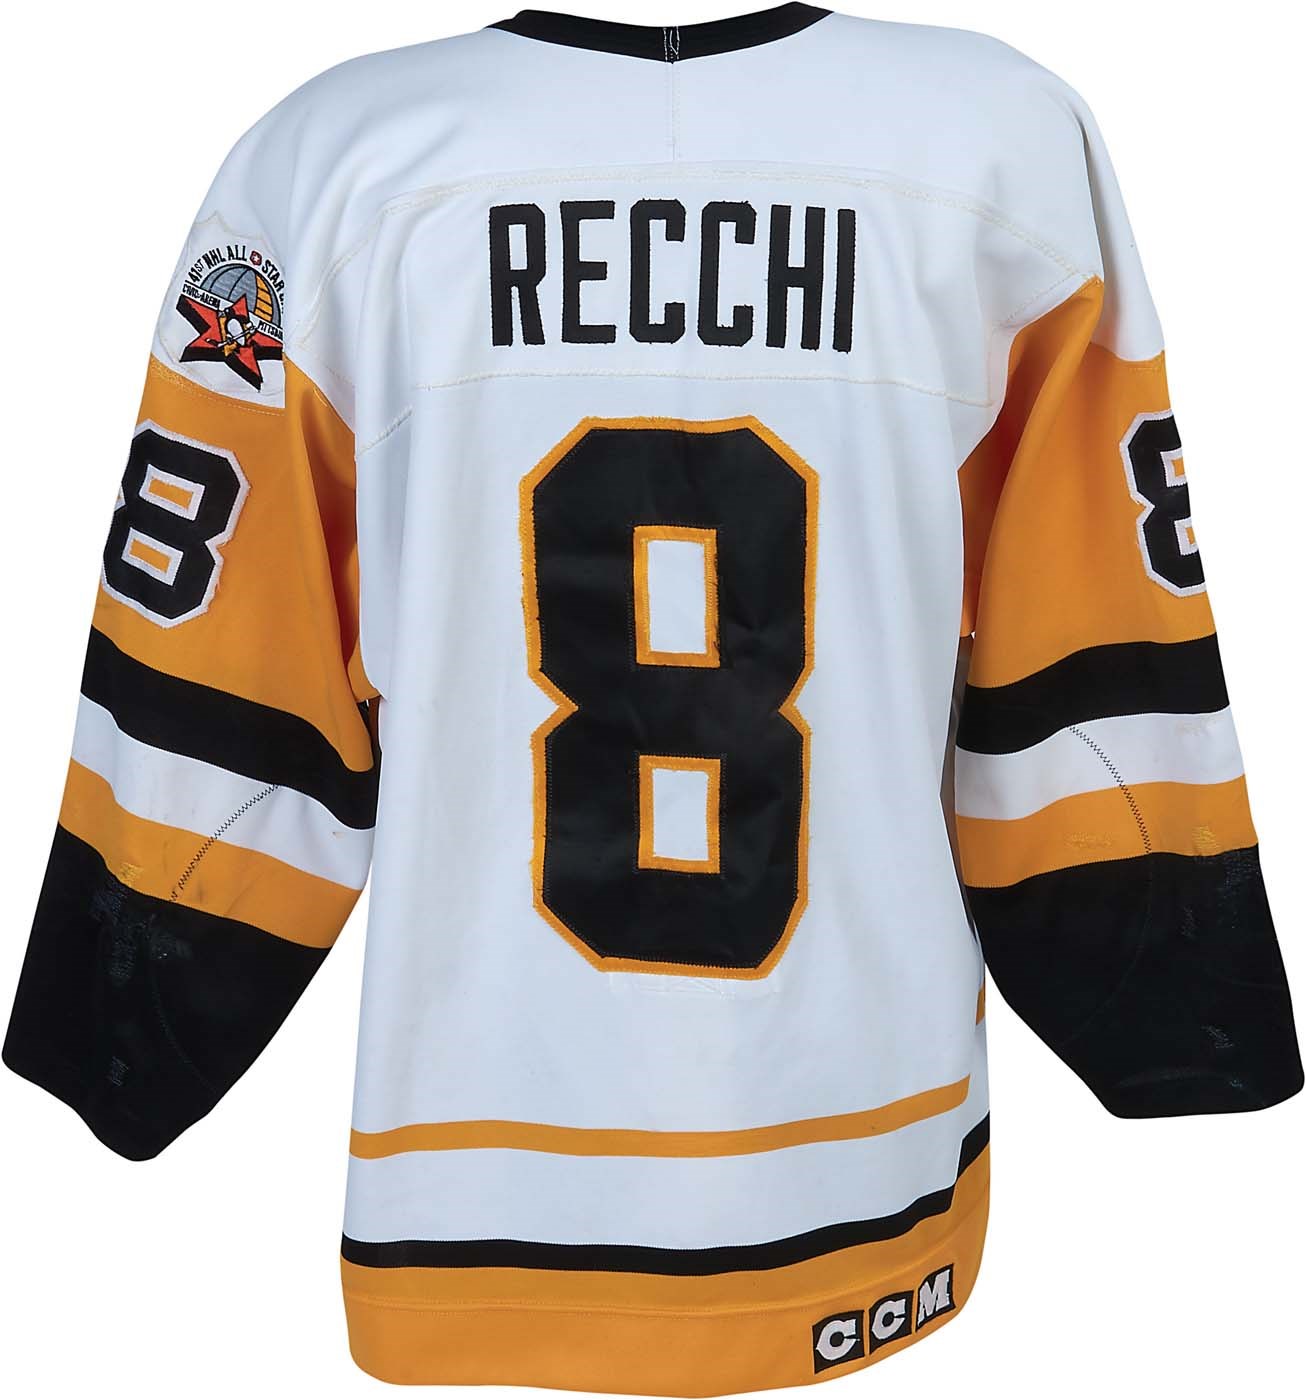 Hockey - 1989-90 Mark Recchi Game Worn Pittsburgh Penguins Rookie Jersey w/All-Star Patch & 26 Team Repairs